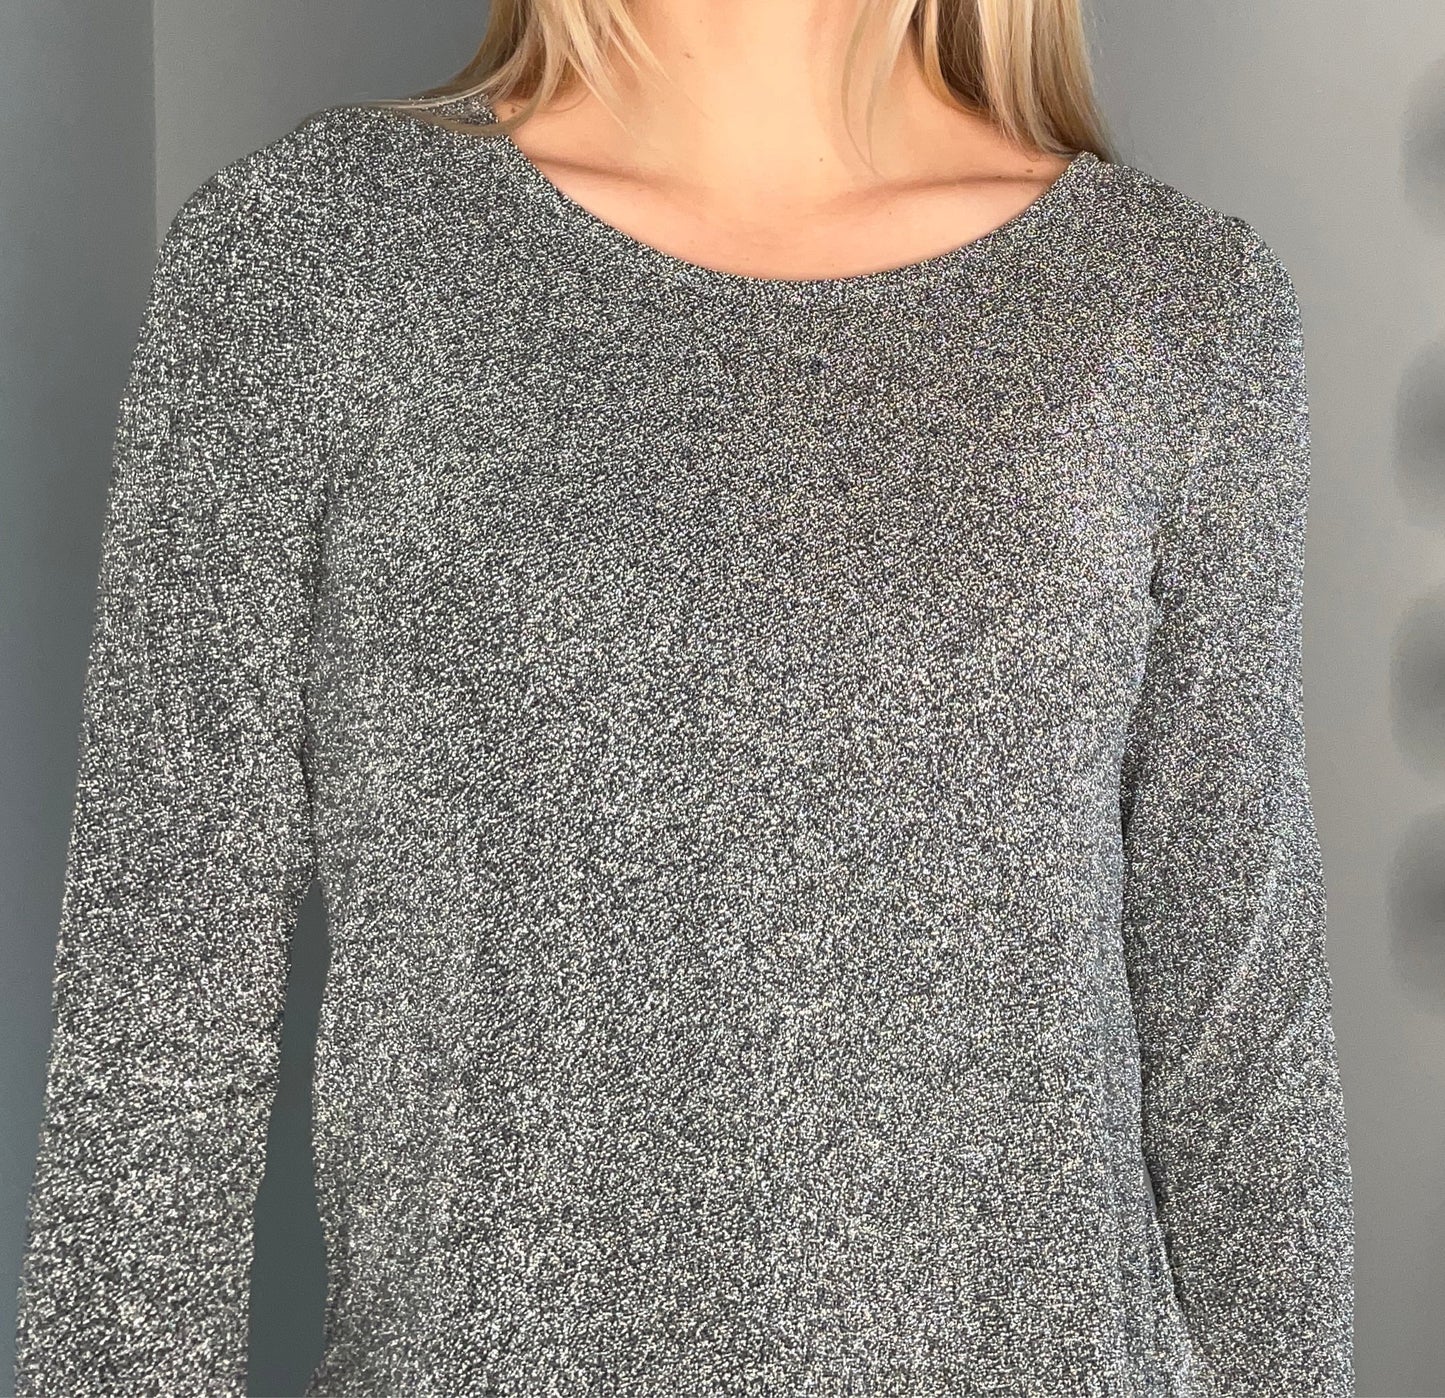 PERFECT SPARKLE TOP